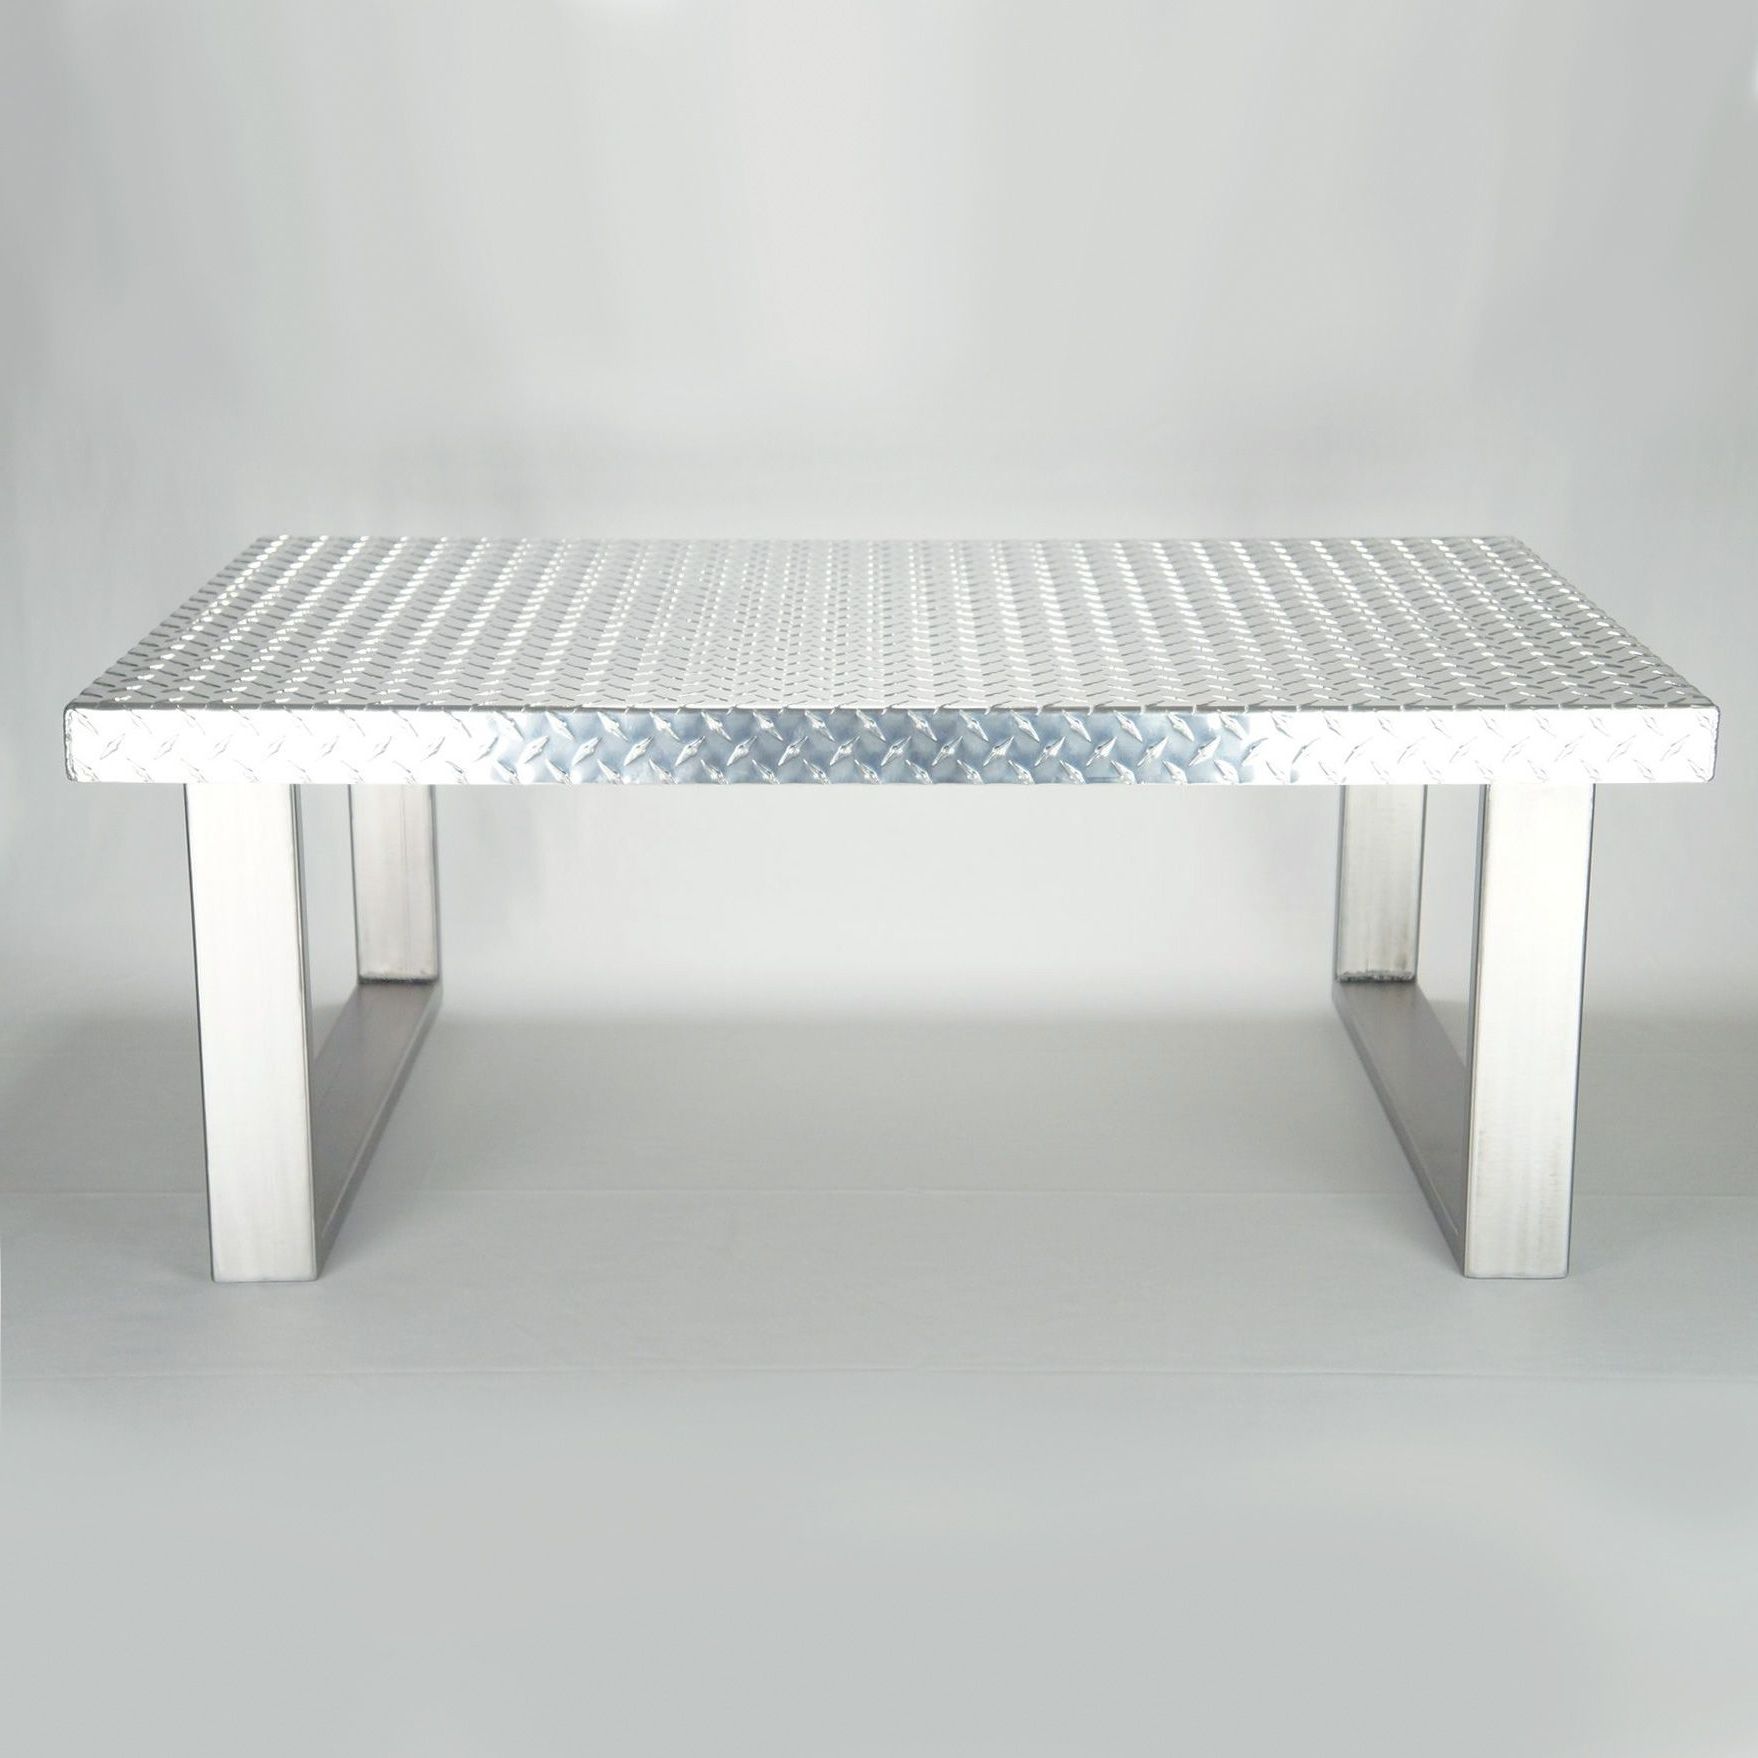 Hand Made Industrial Diamond Plate Metal Coffee Table Inside Most Recent Metal Coffee Tables (View 18 of 20)